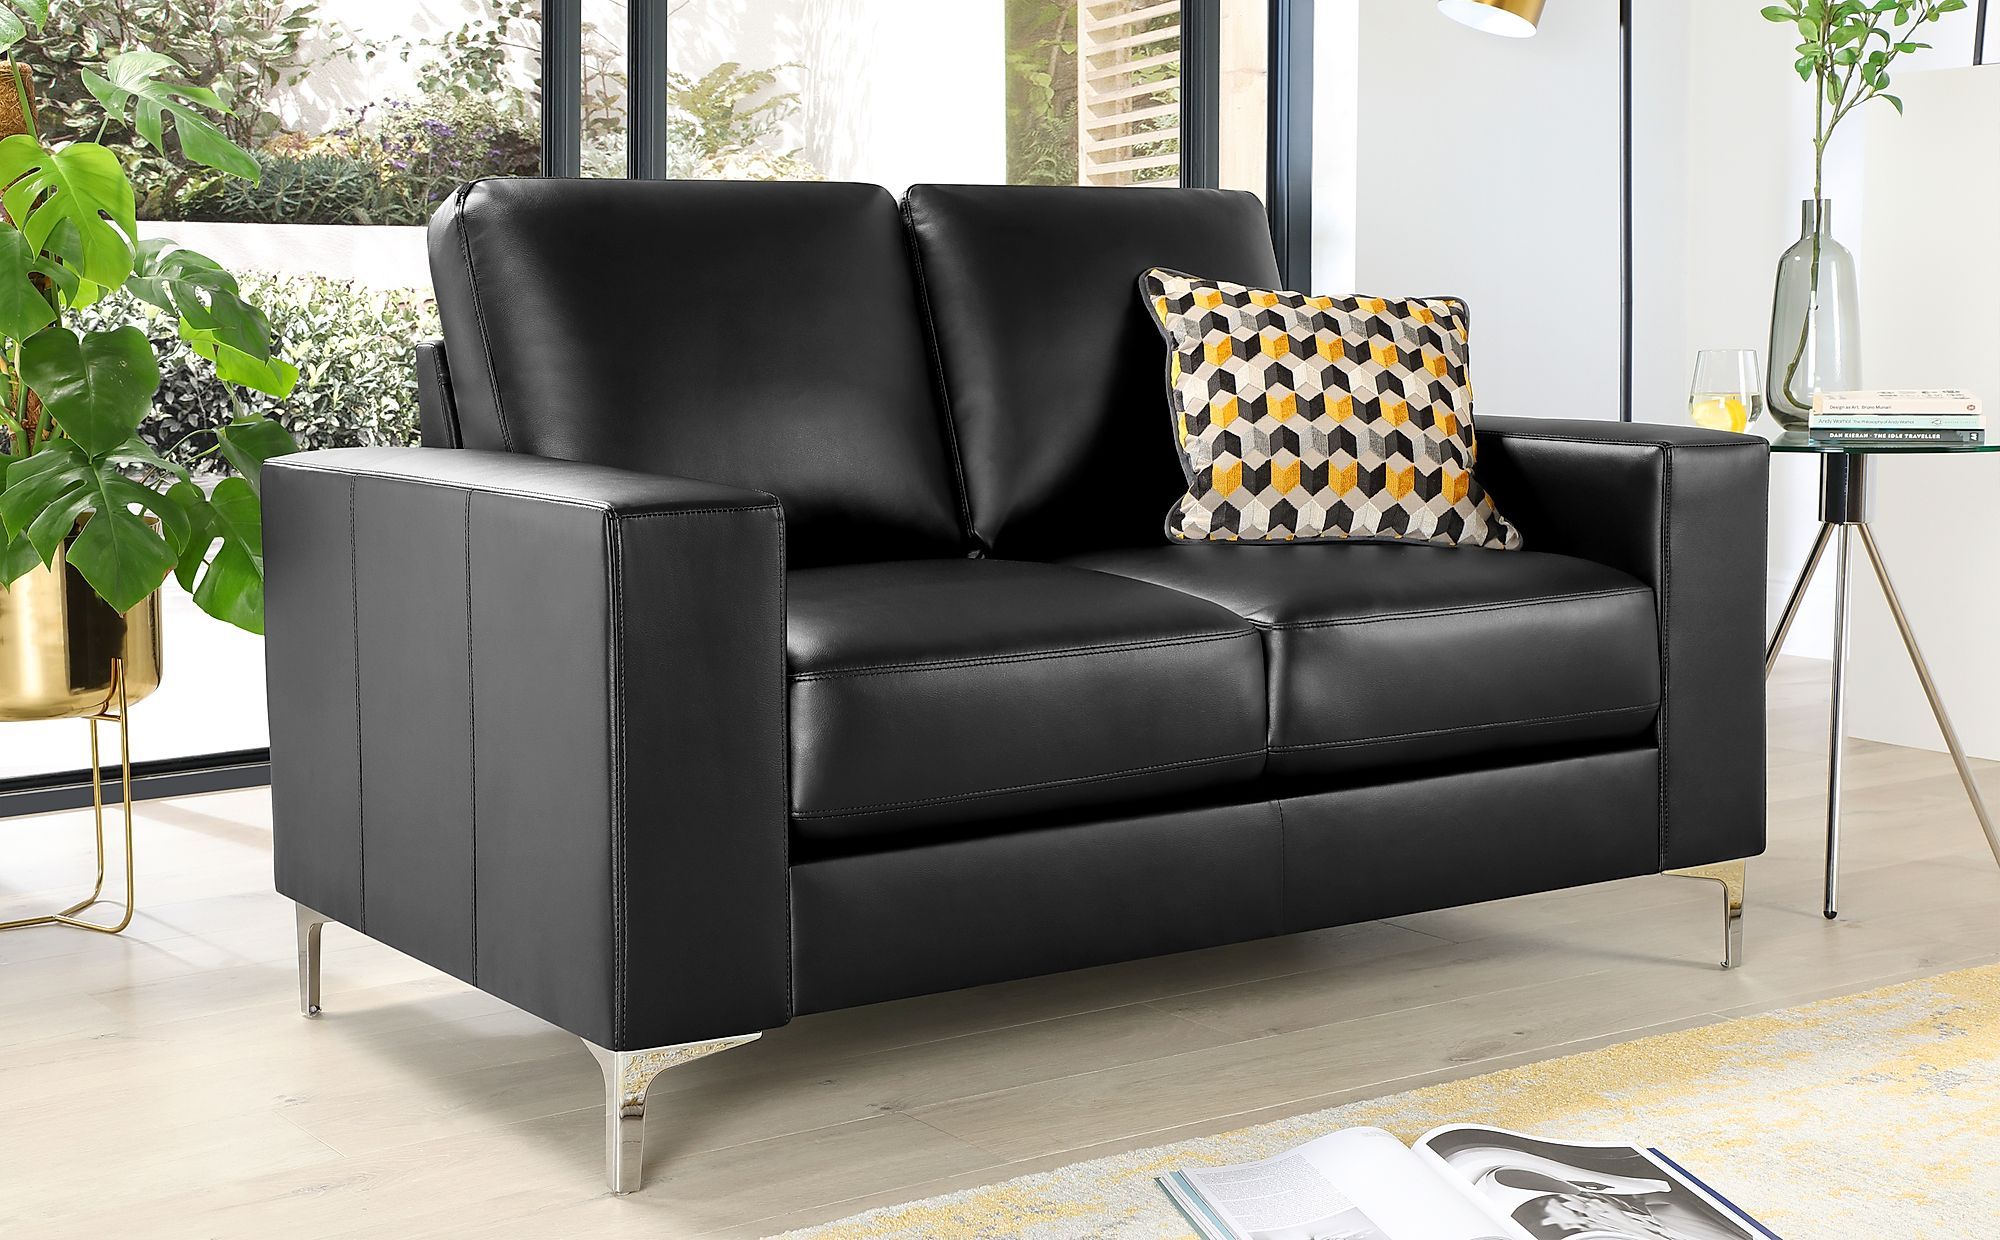 Baltimore Black Leather 2 Seater Sofa | Furniture Choice Within Black Velvet 2 Seater Sofa Beds (Gallery 9 of 20)